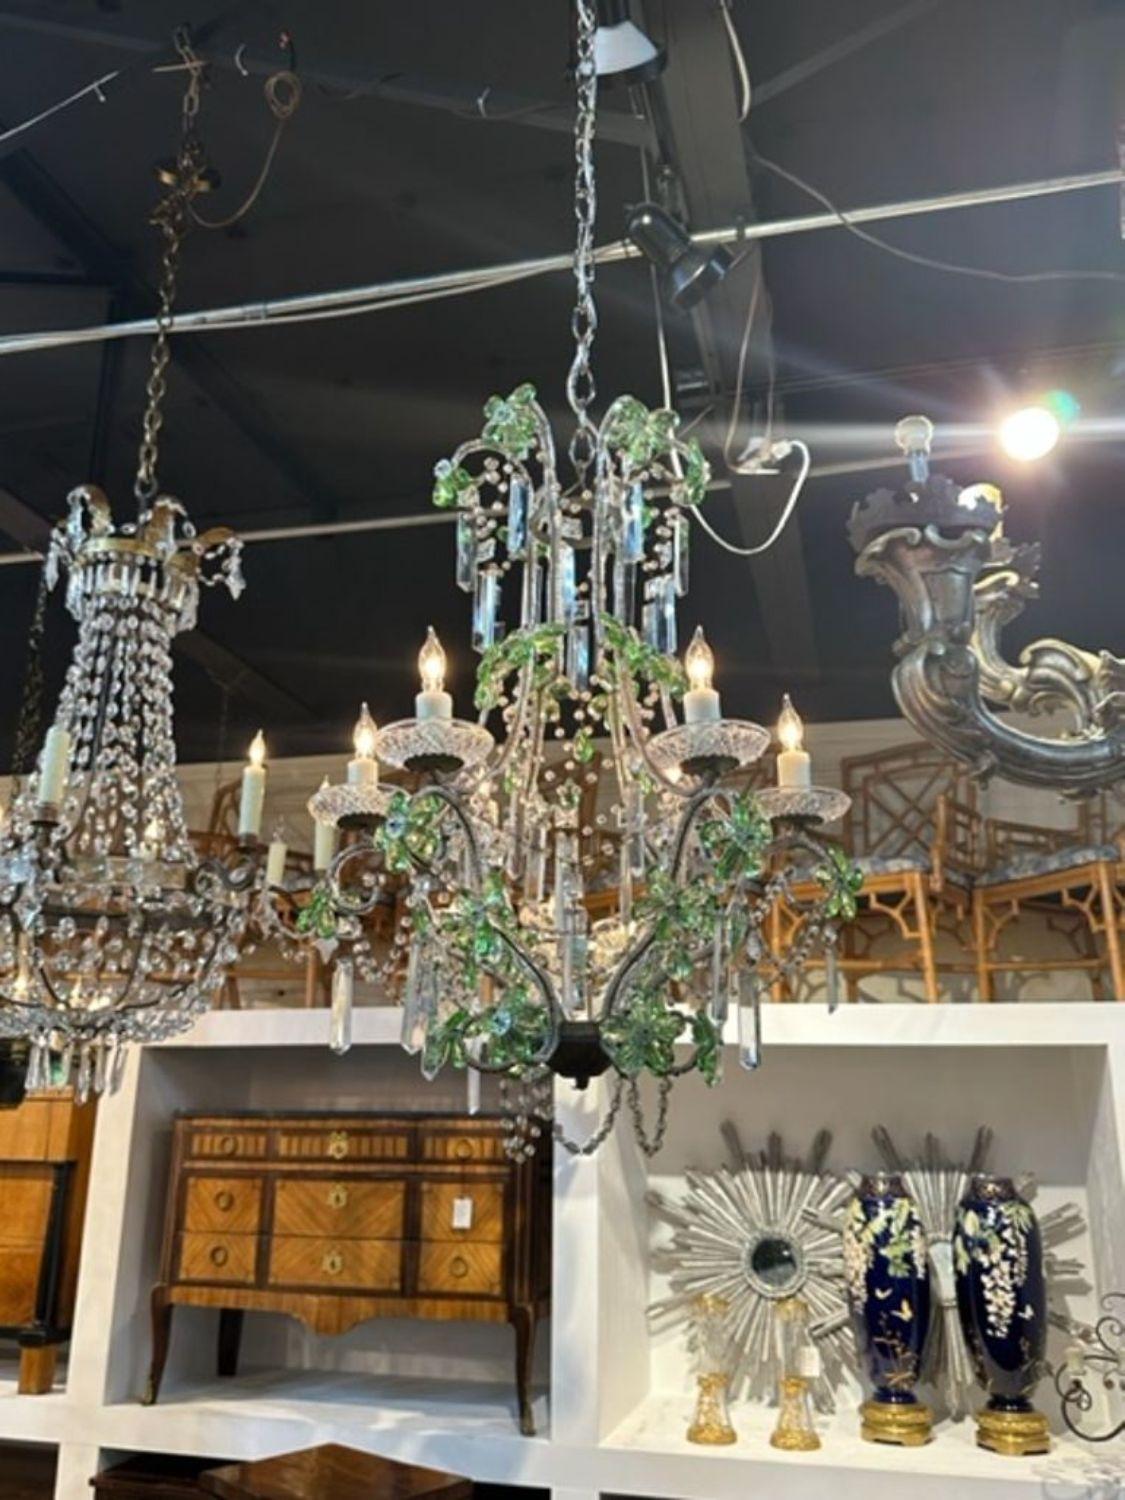 Beautiful vintage chandelier with beads and green prisms, some in the shape of flowers. Makes an elegant statement!